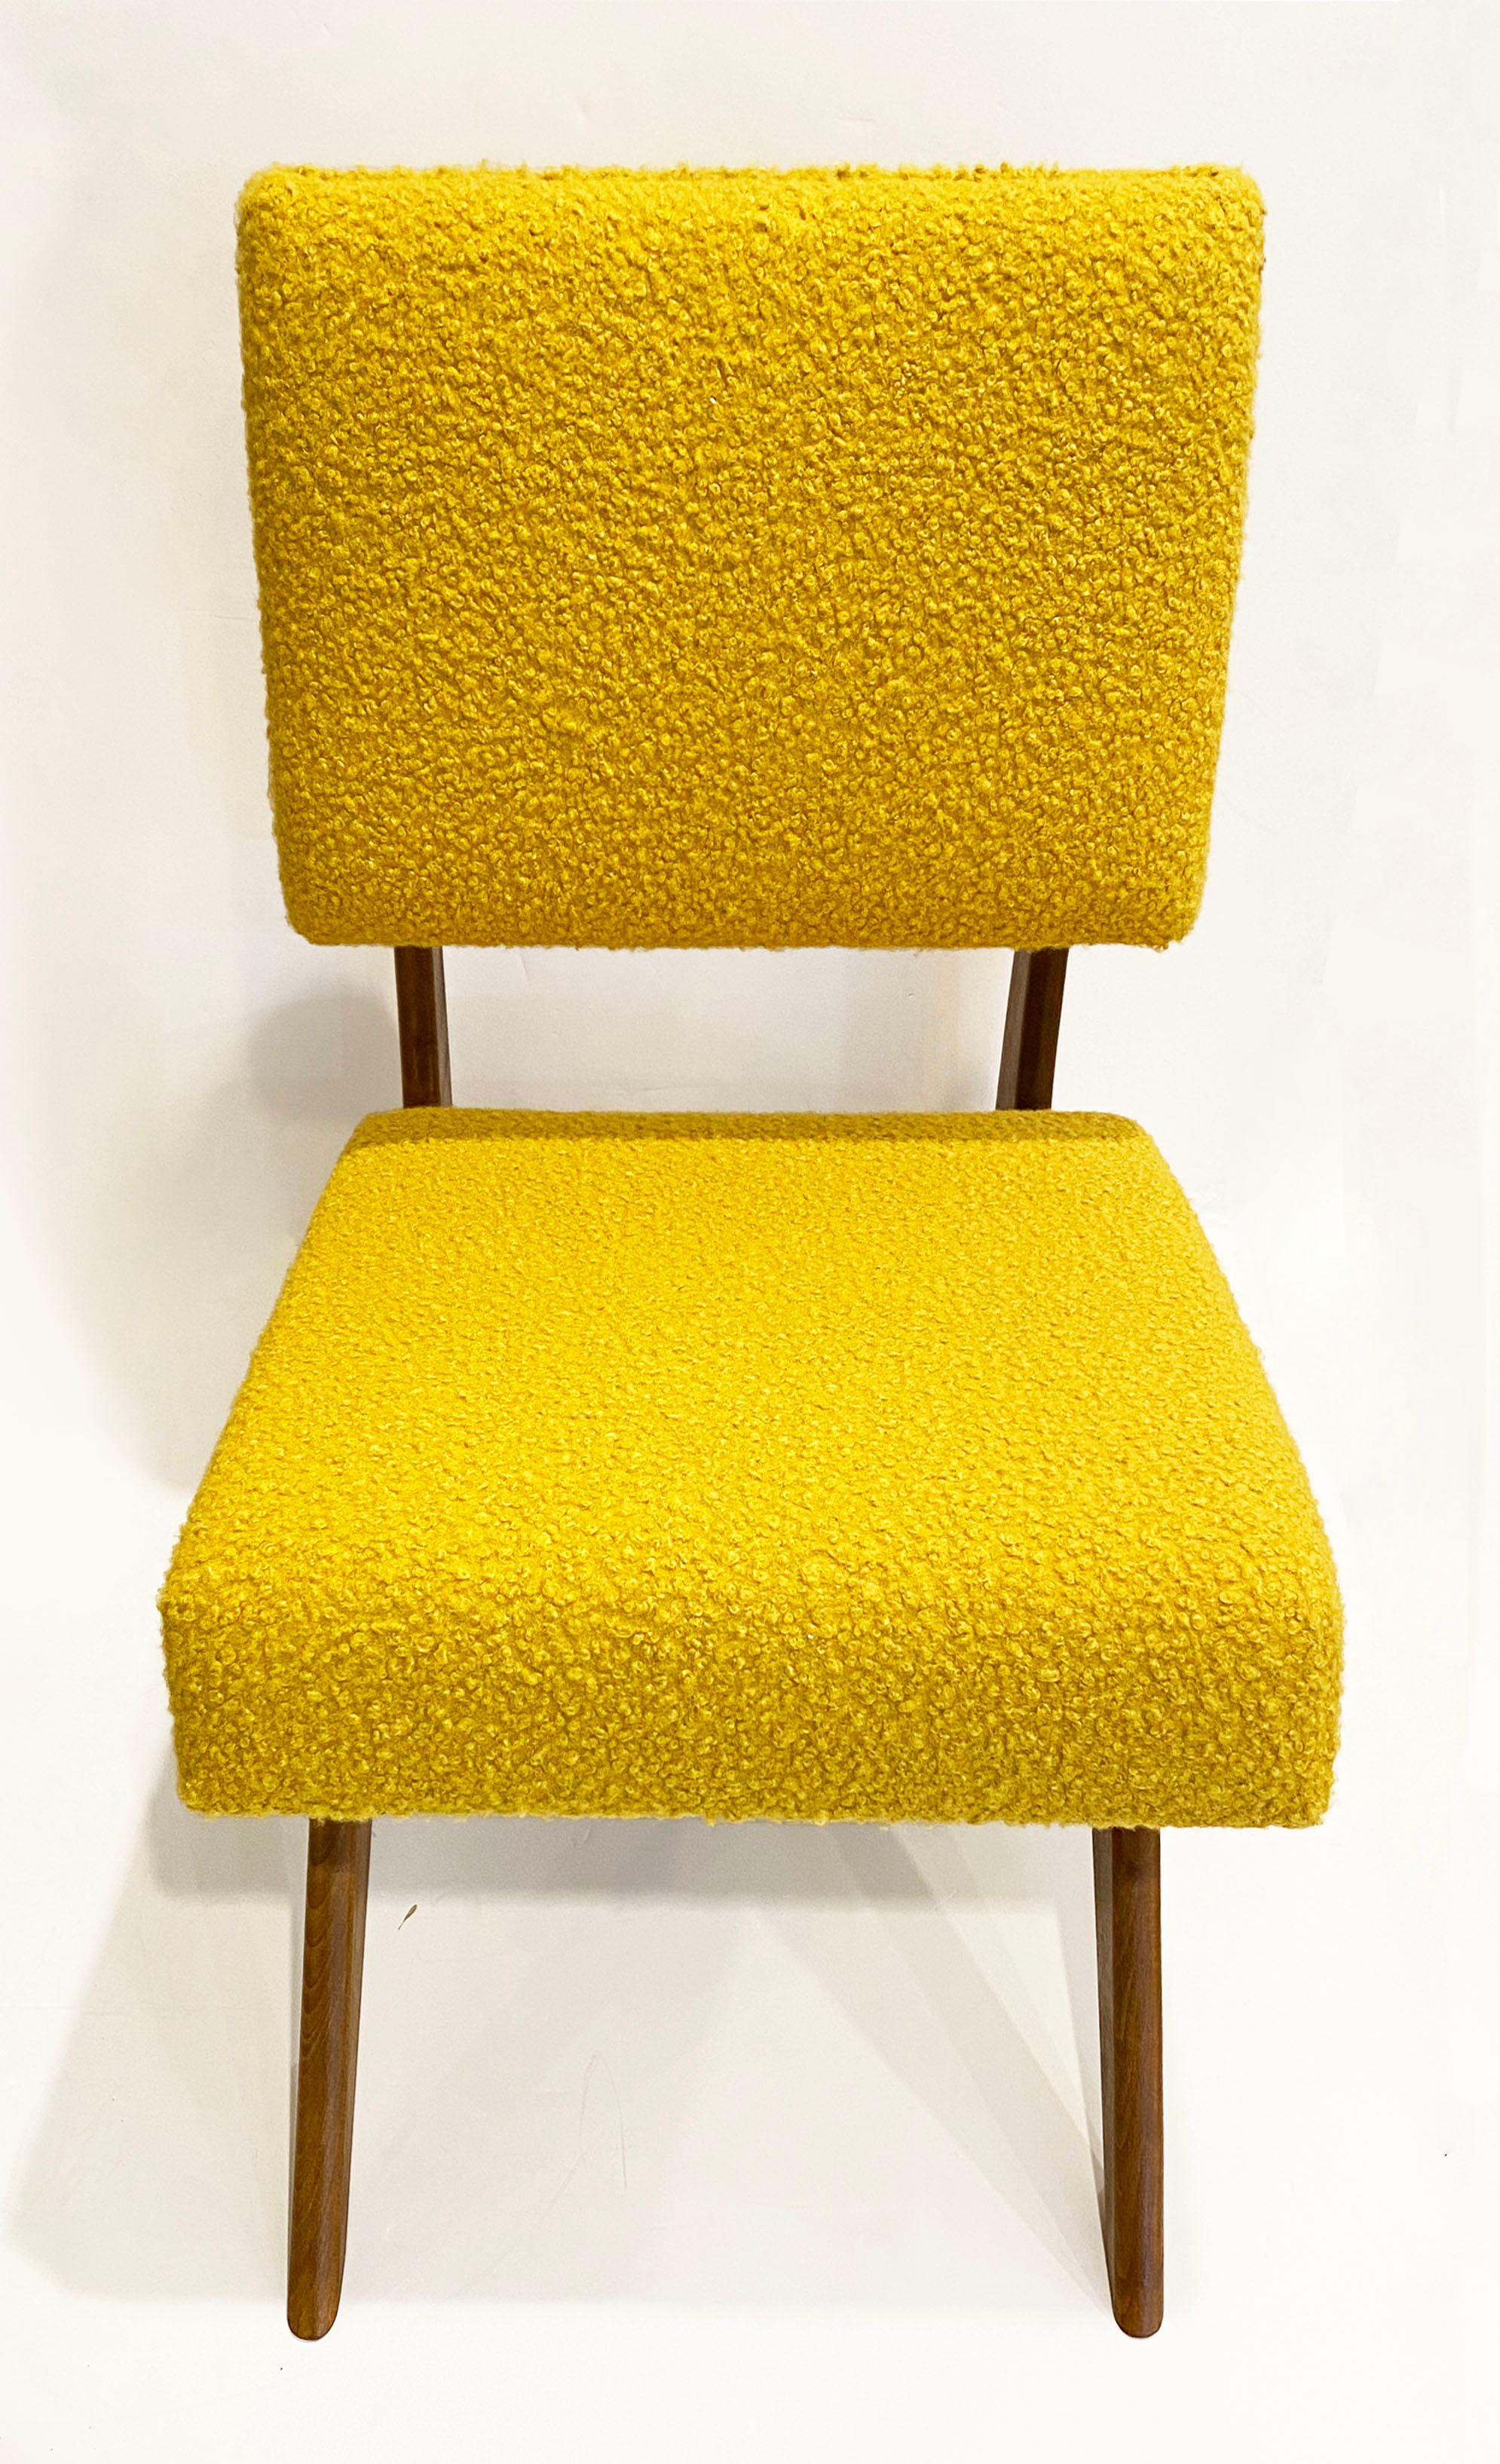 Bespoke Italian Pair of Boucle Mustard Yellow Aero Curved Beech Lounge Chairs For Sale 3